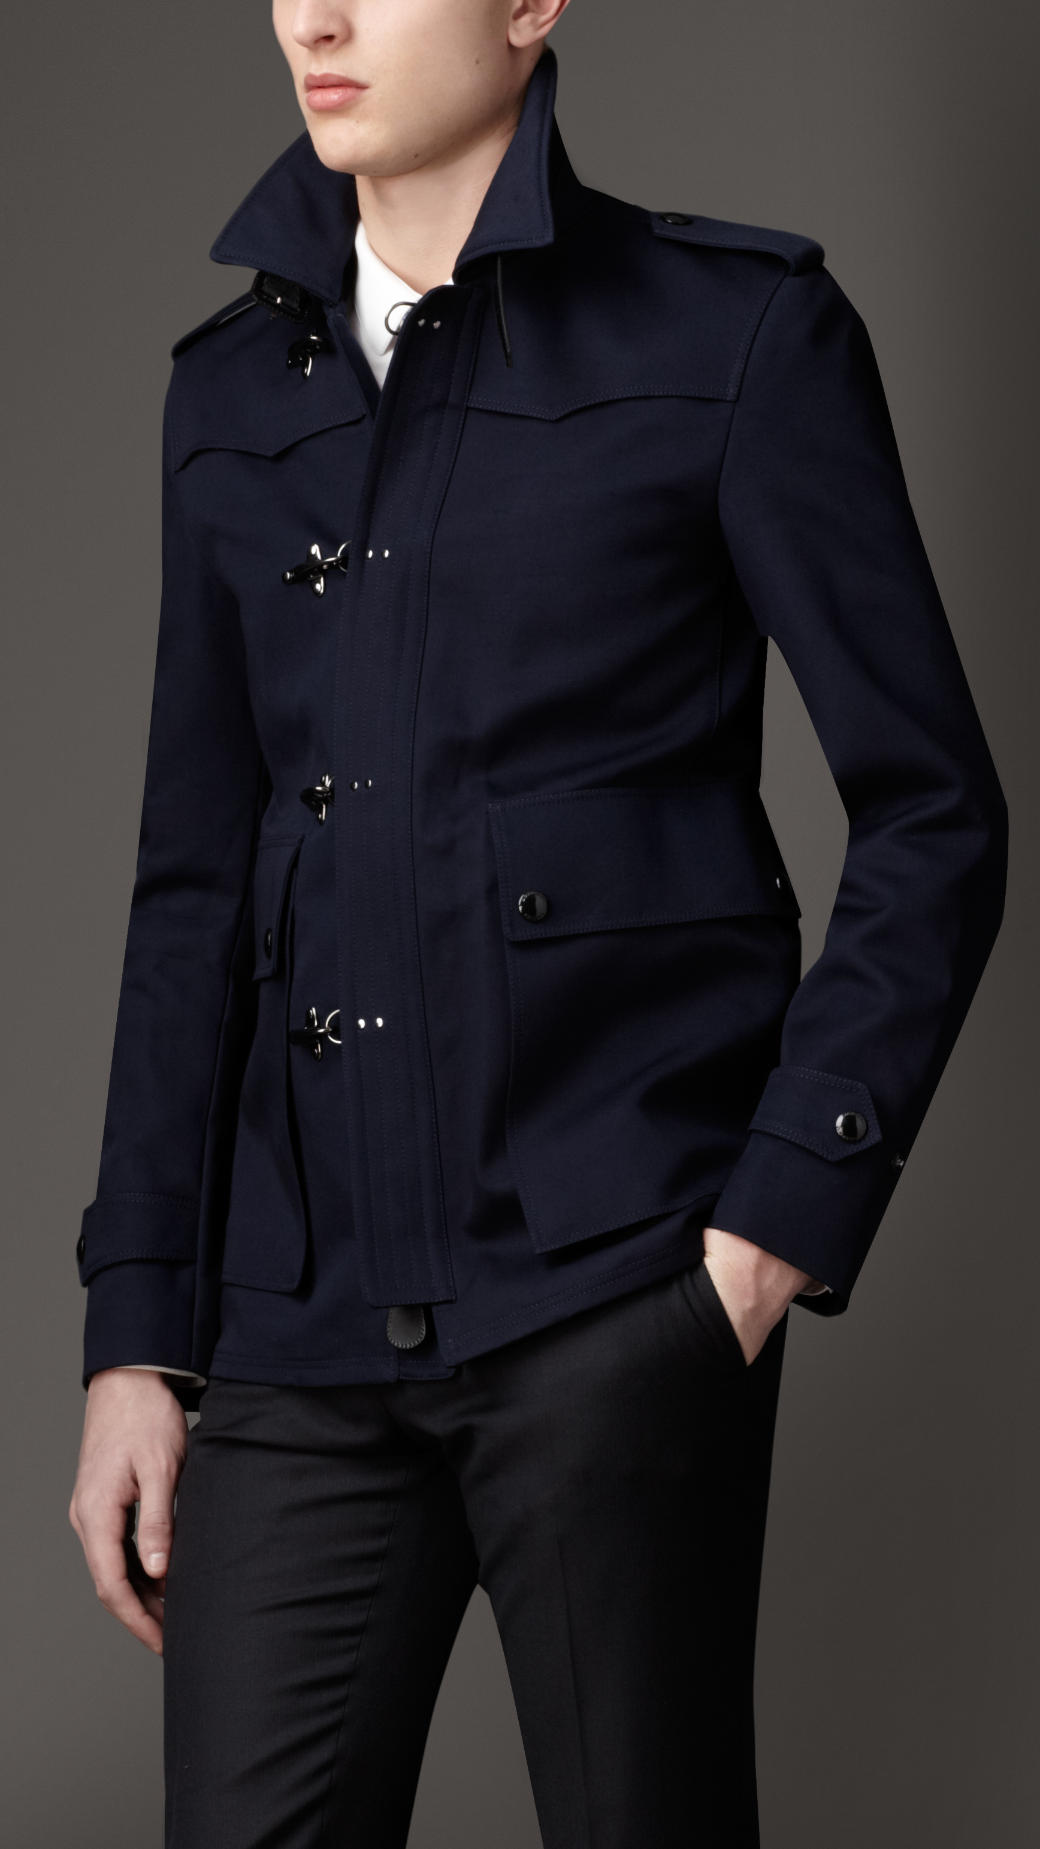 Lyst - Burberry Toggle Closure Coat in Blue for Men